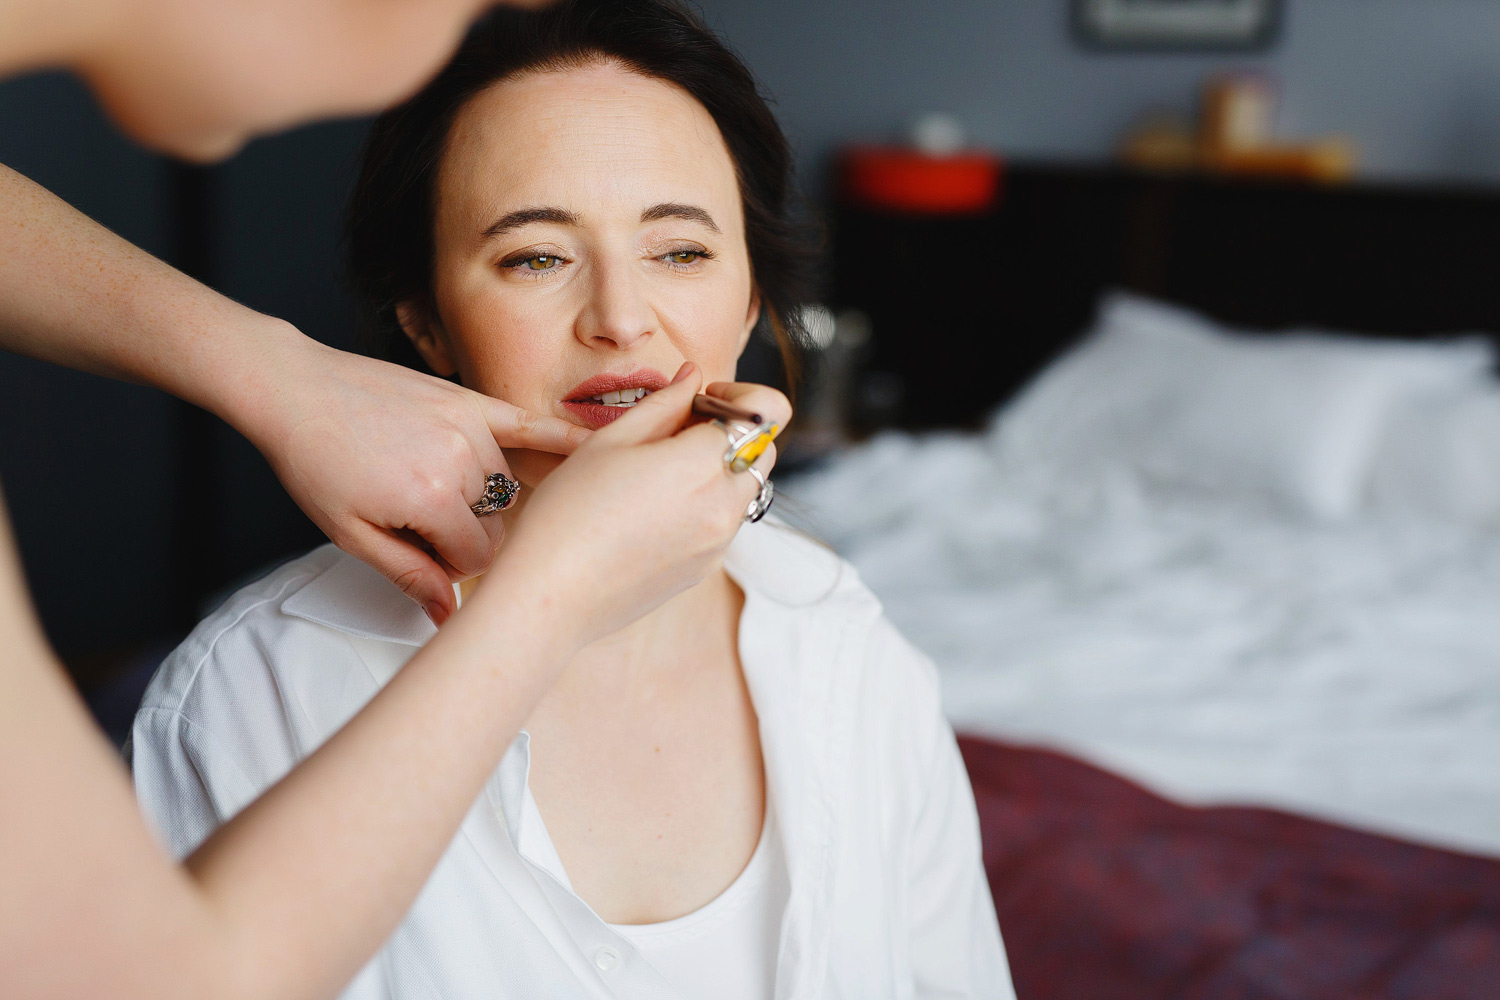 A bride has her Charlotte Tilbury lipstick applied.